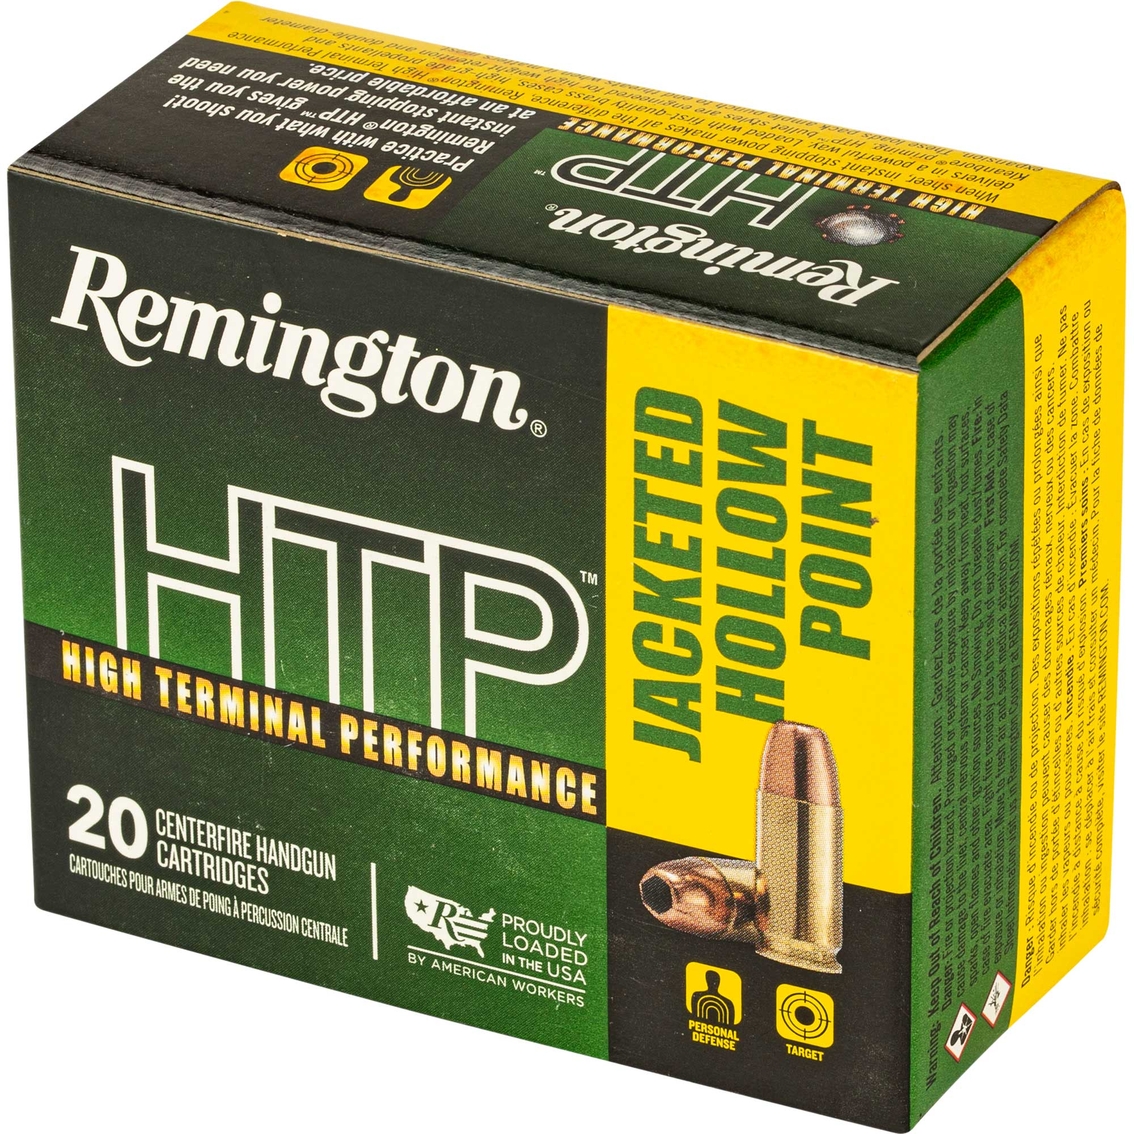 Remington High Terminal Performance 9mm 147 Gr. Jacketed Hollow Point ...